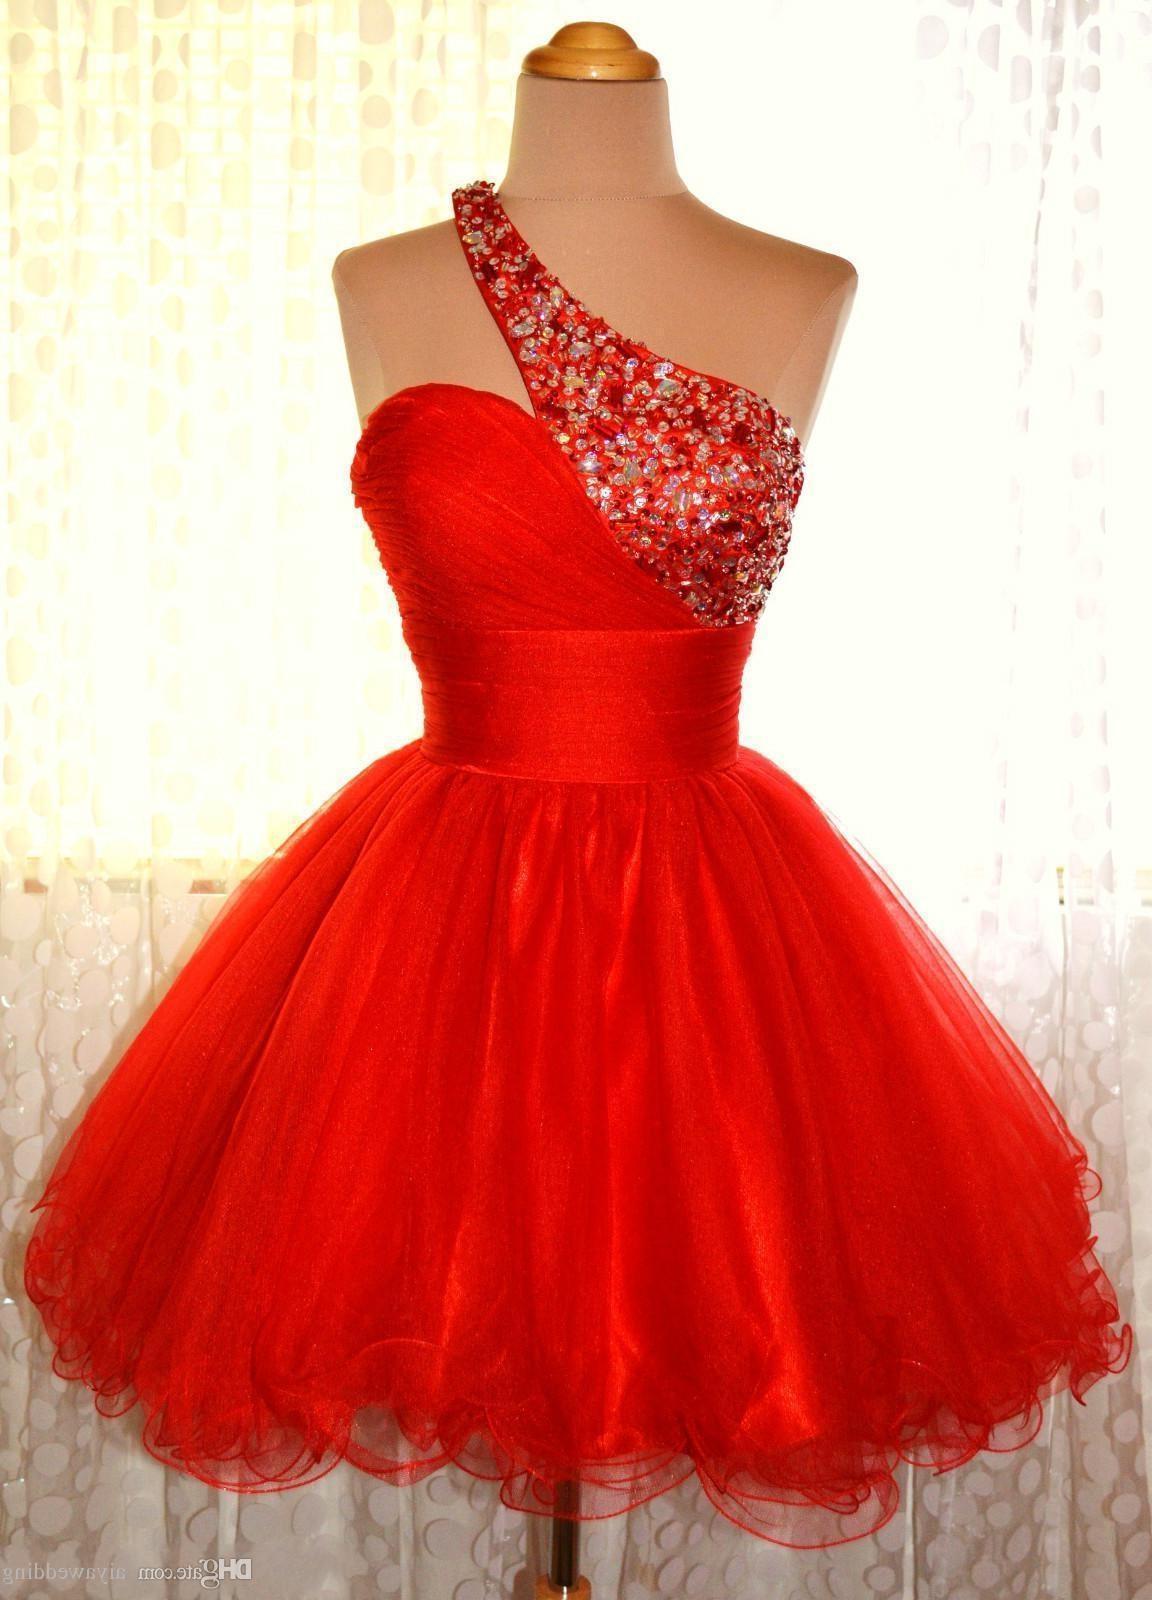 Prom Dress Places, One Shoulder Red Sleeveless A Line Organza Pleated Rhinestone Homecoming Dresses